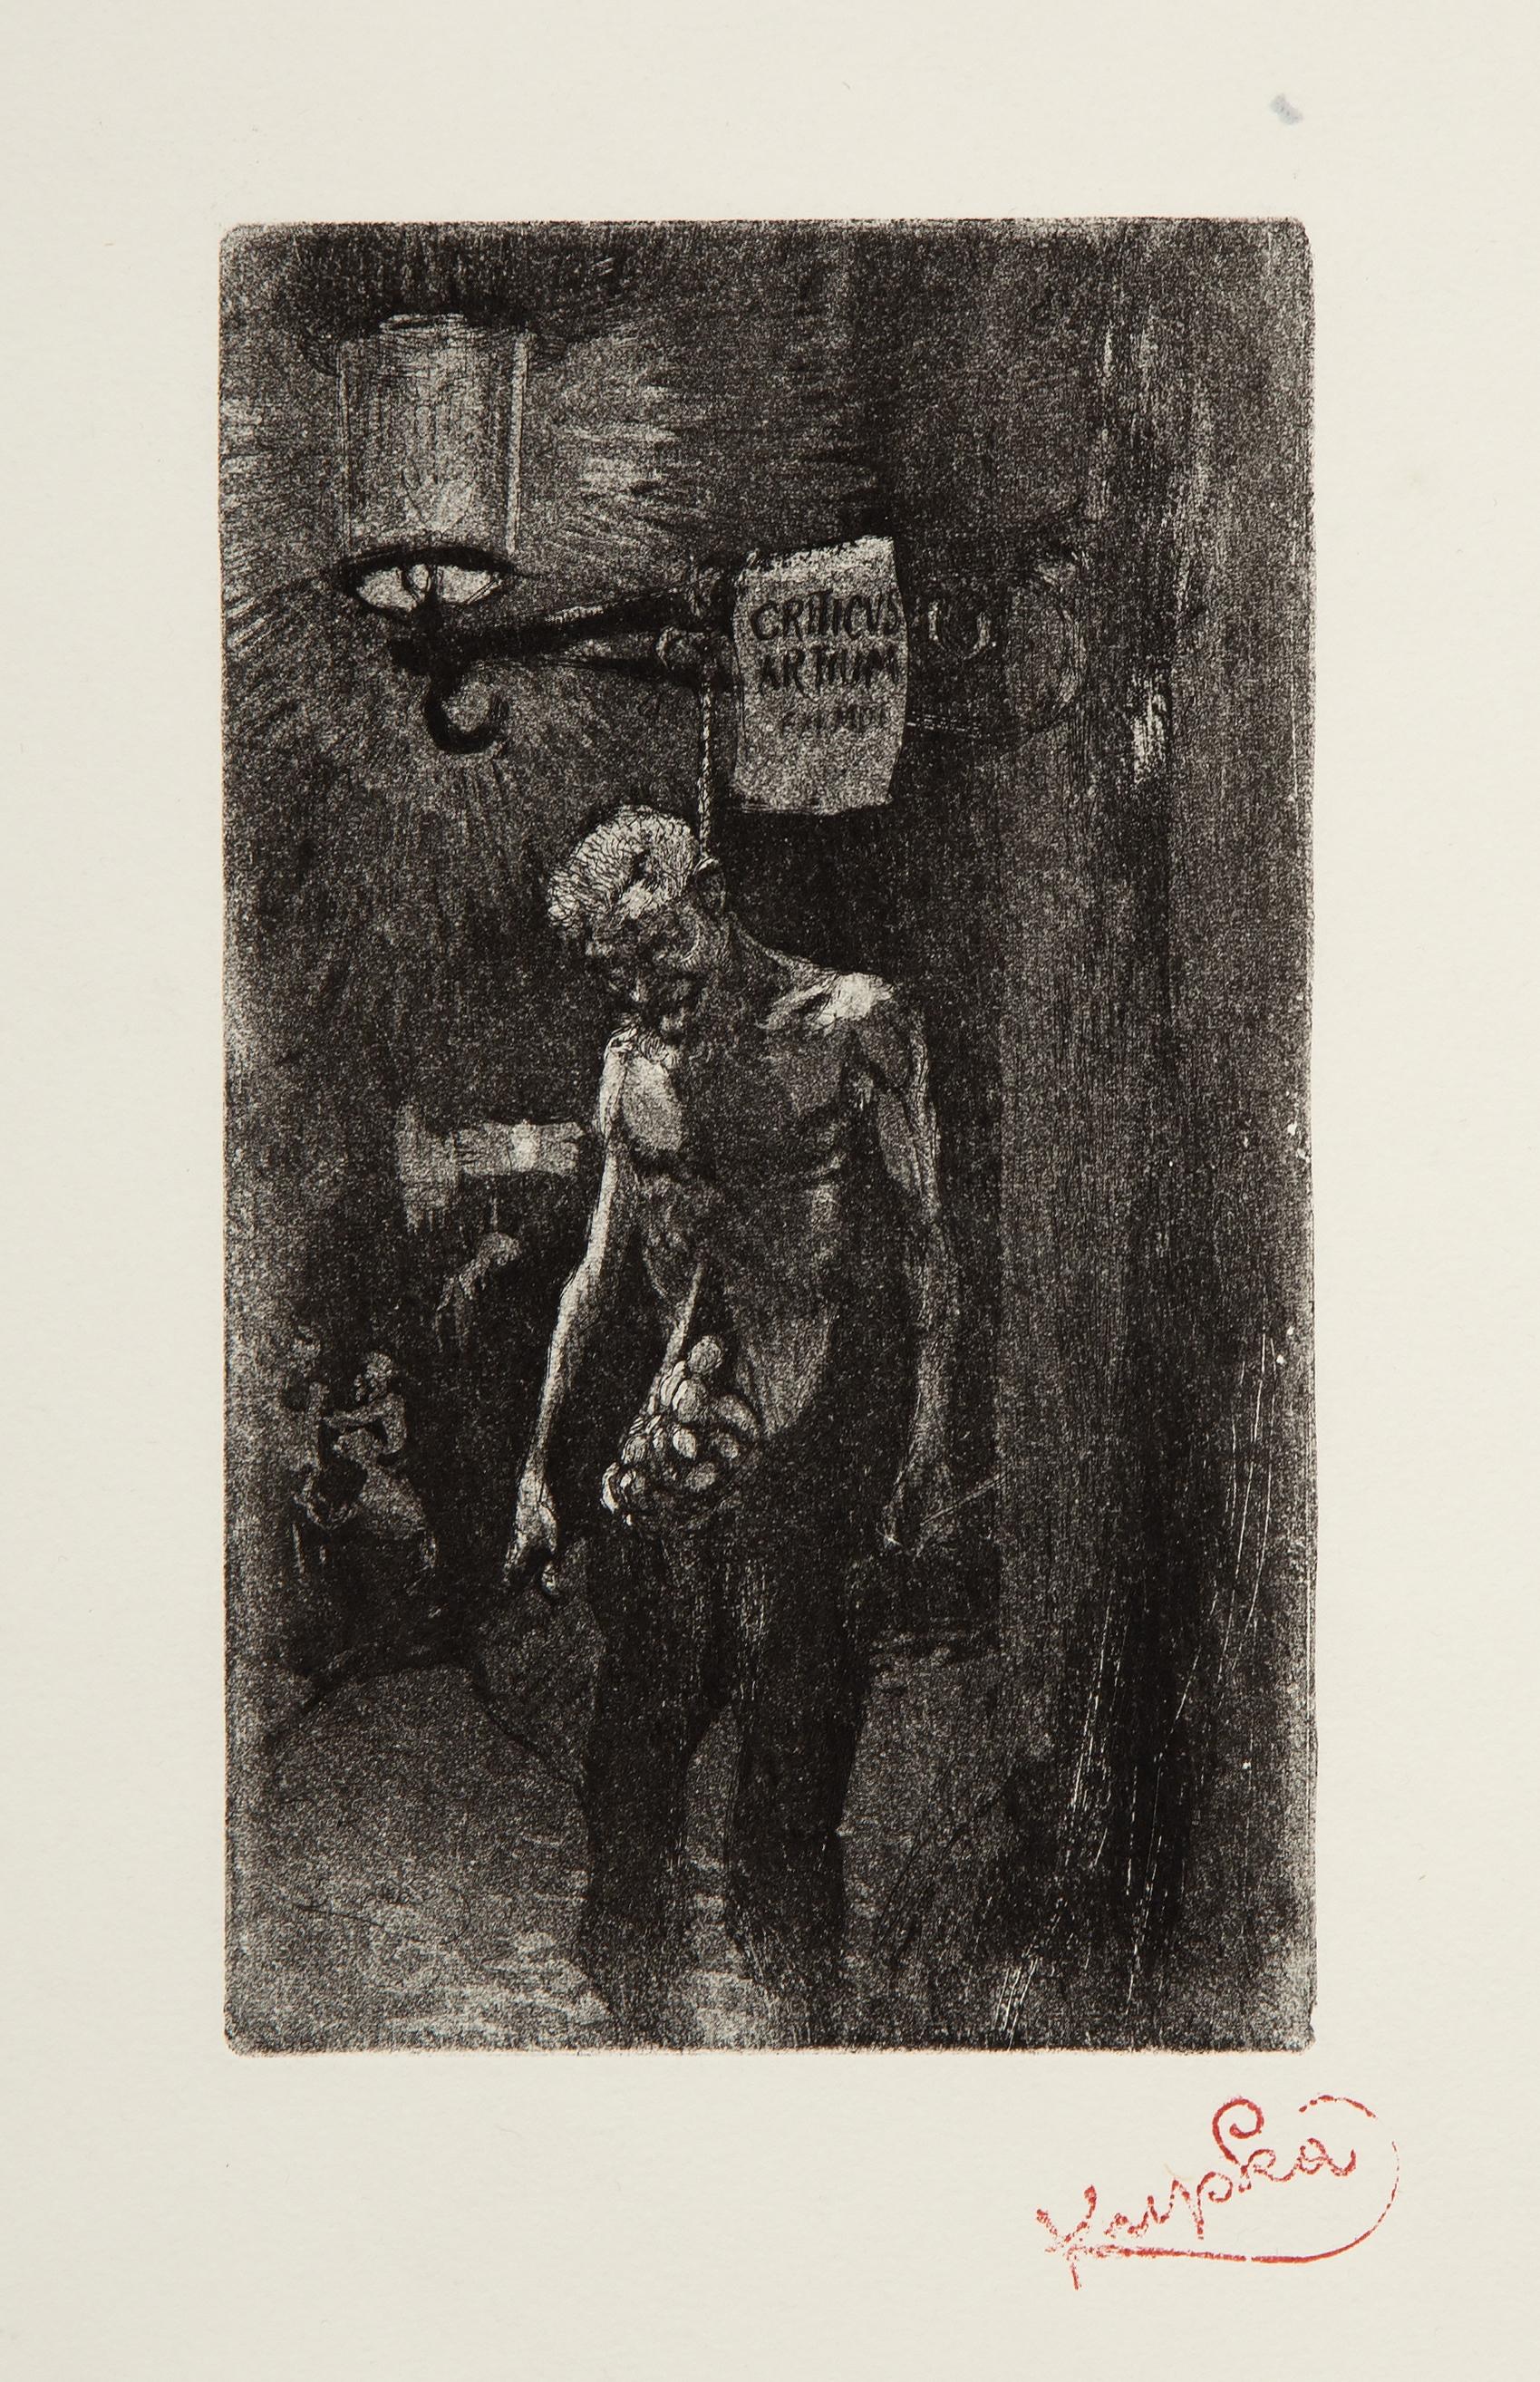 Frantisek Kupka, Czech (1871 - 1957) - Criticus Artium. Year: 1905, Medium: Etching, stamp signed, Image Size: 6.75 x 4 inches, Size: 11 x 7.5 in. (27.94 x 19.05 cm), Description: From the collection of the late Larry Saphire.